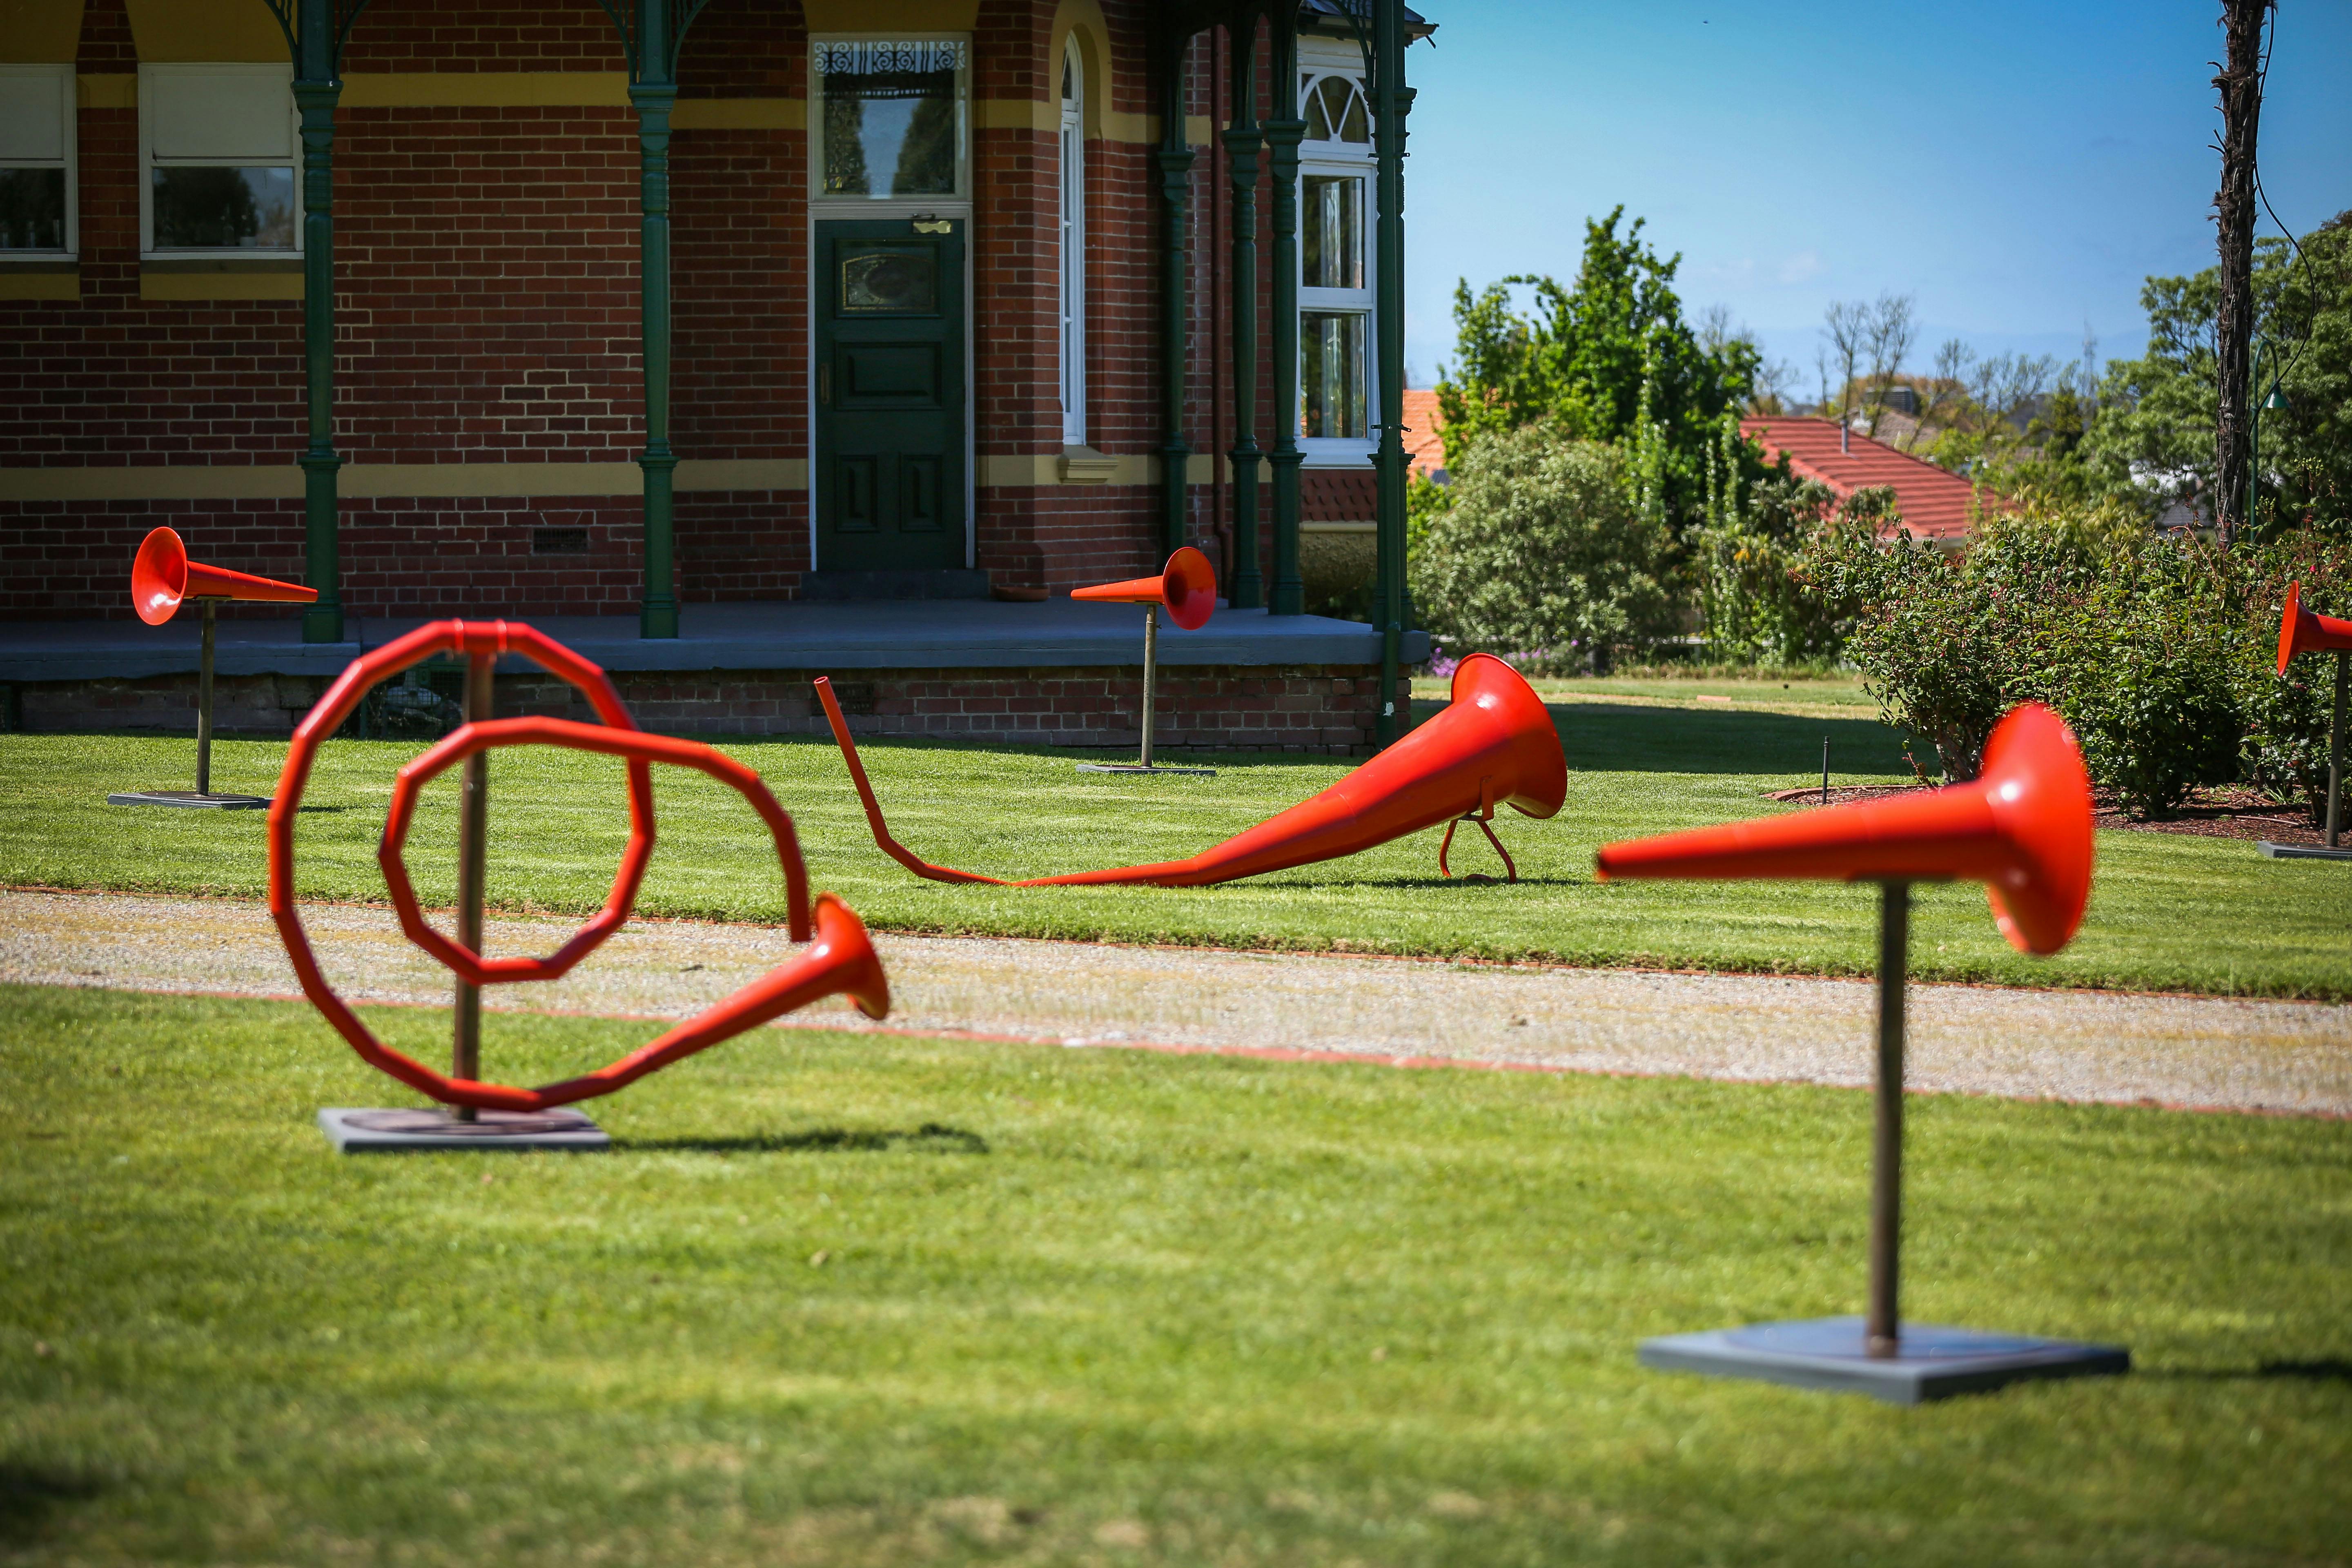 Madeleine Flynn and Tim Humphrey | The Megaphone Project, 2017 | Installation View: Bundoora Homestead Art Centre | Photograph by Nicole Cleary | The Megaphone Project was presented by Darebin Music Feast 2017